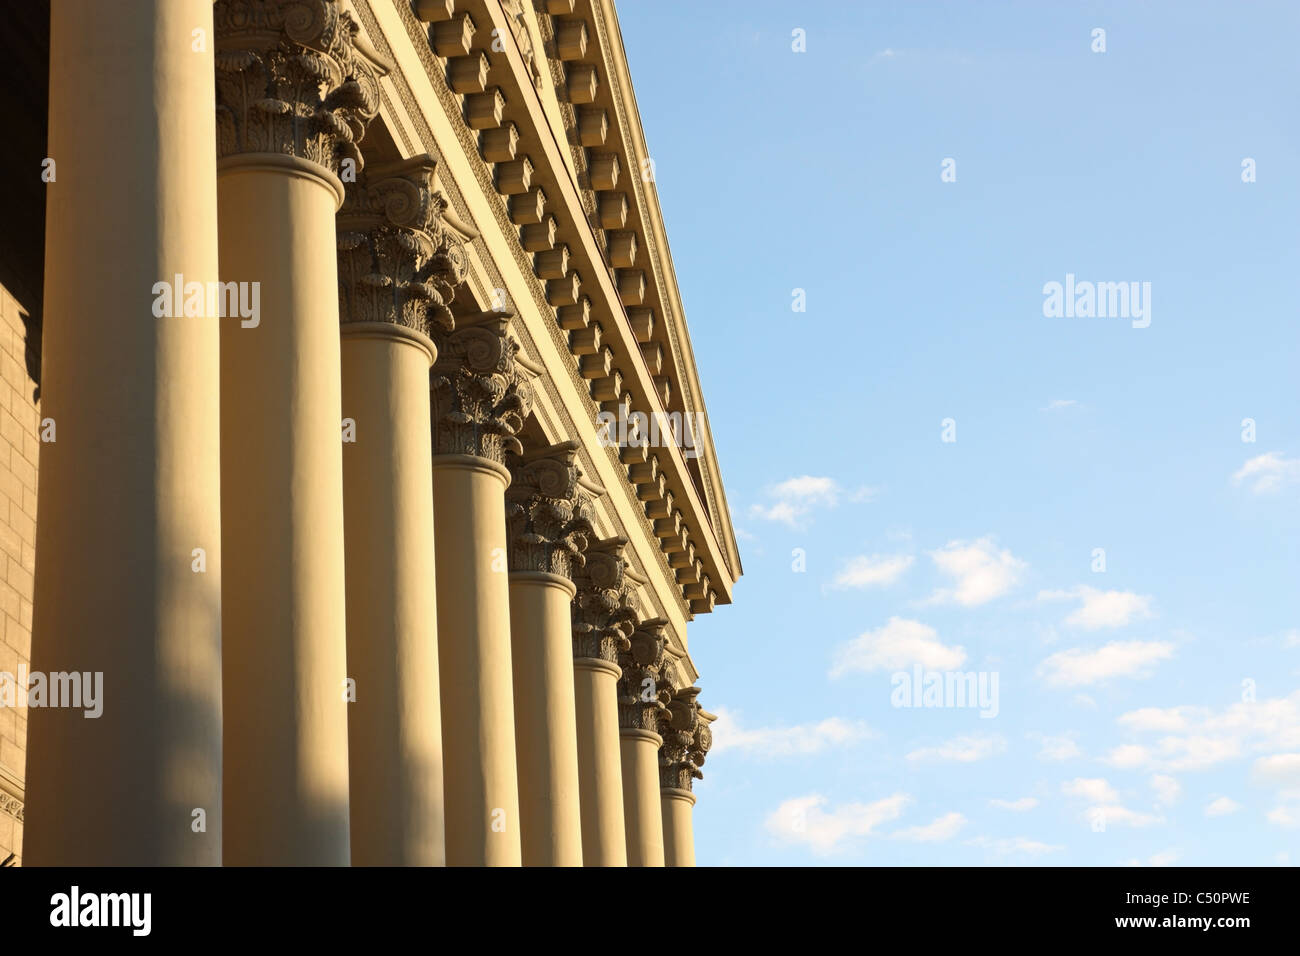 Facade of a building with columns in style neoclassicism against the sky Stock Photo